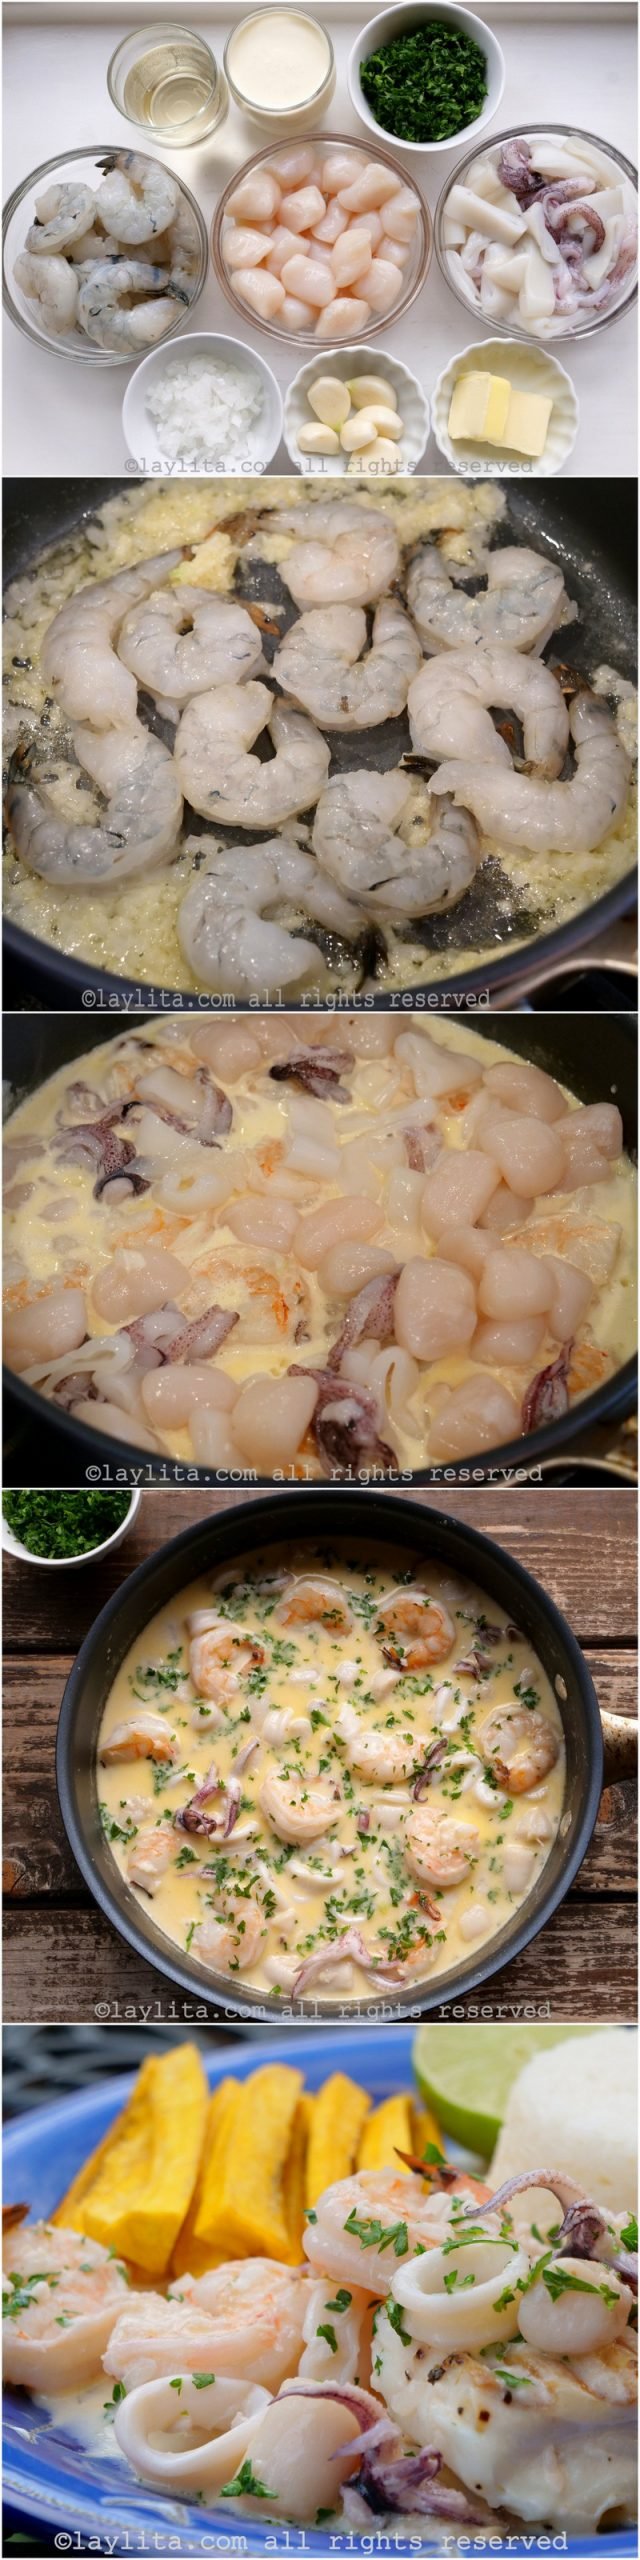 Step by step preparation for seafood in a garlic white wine sauce